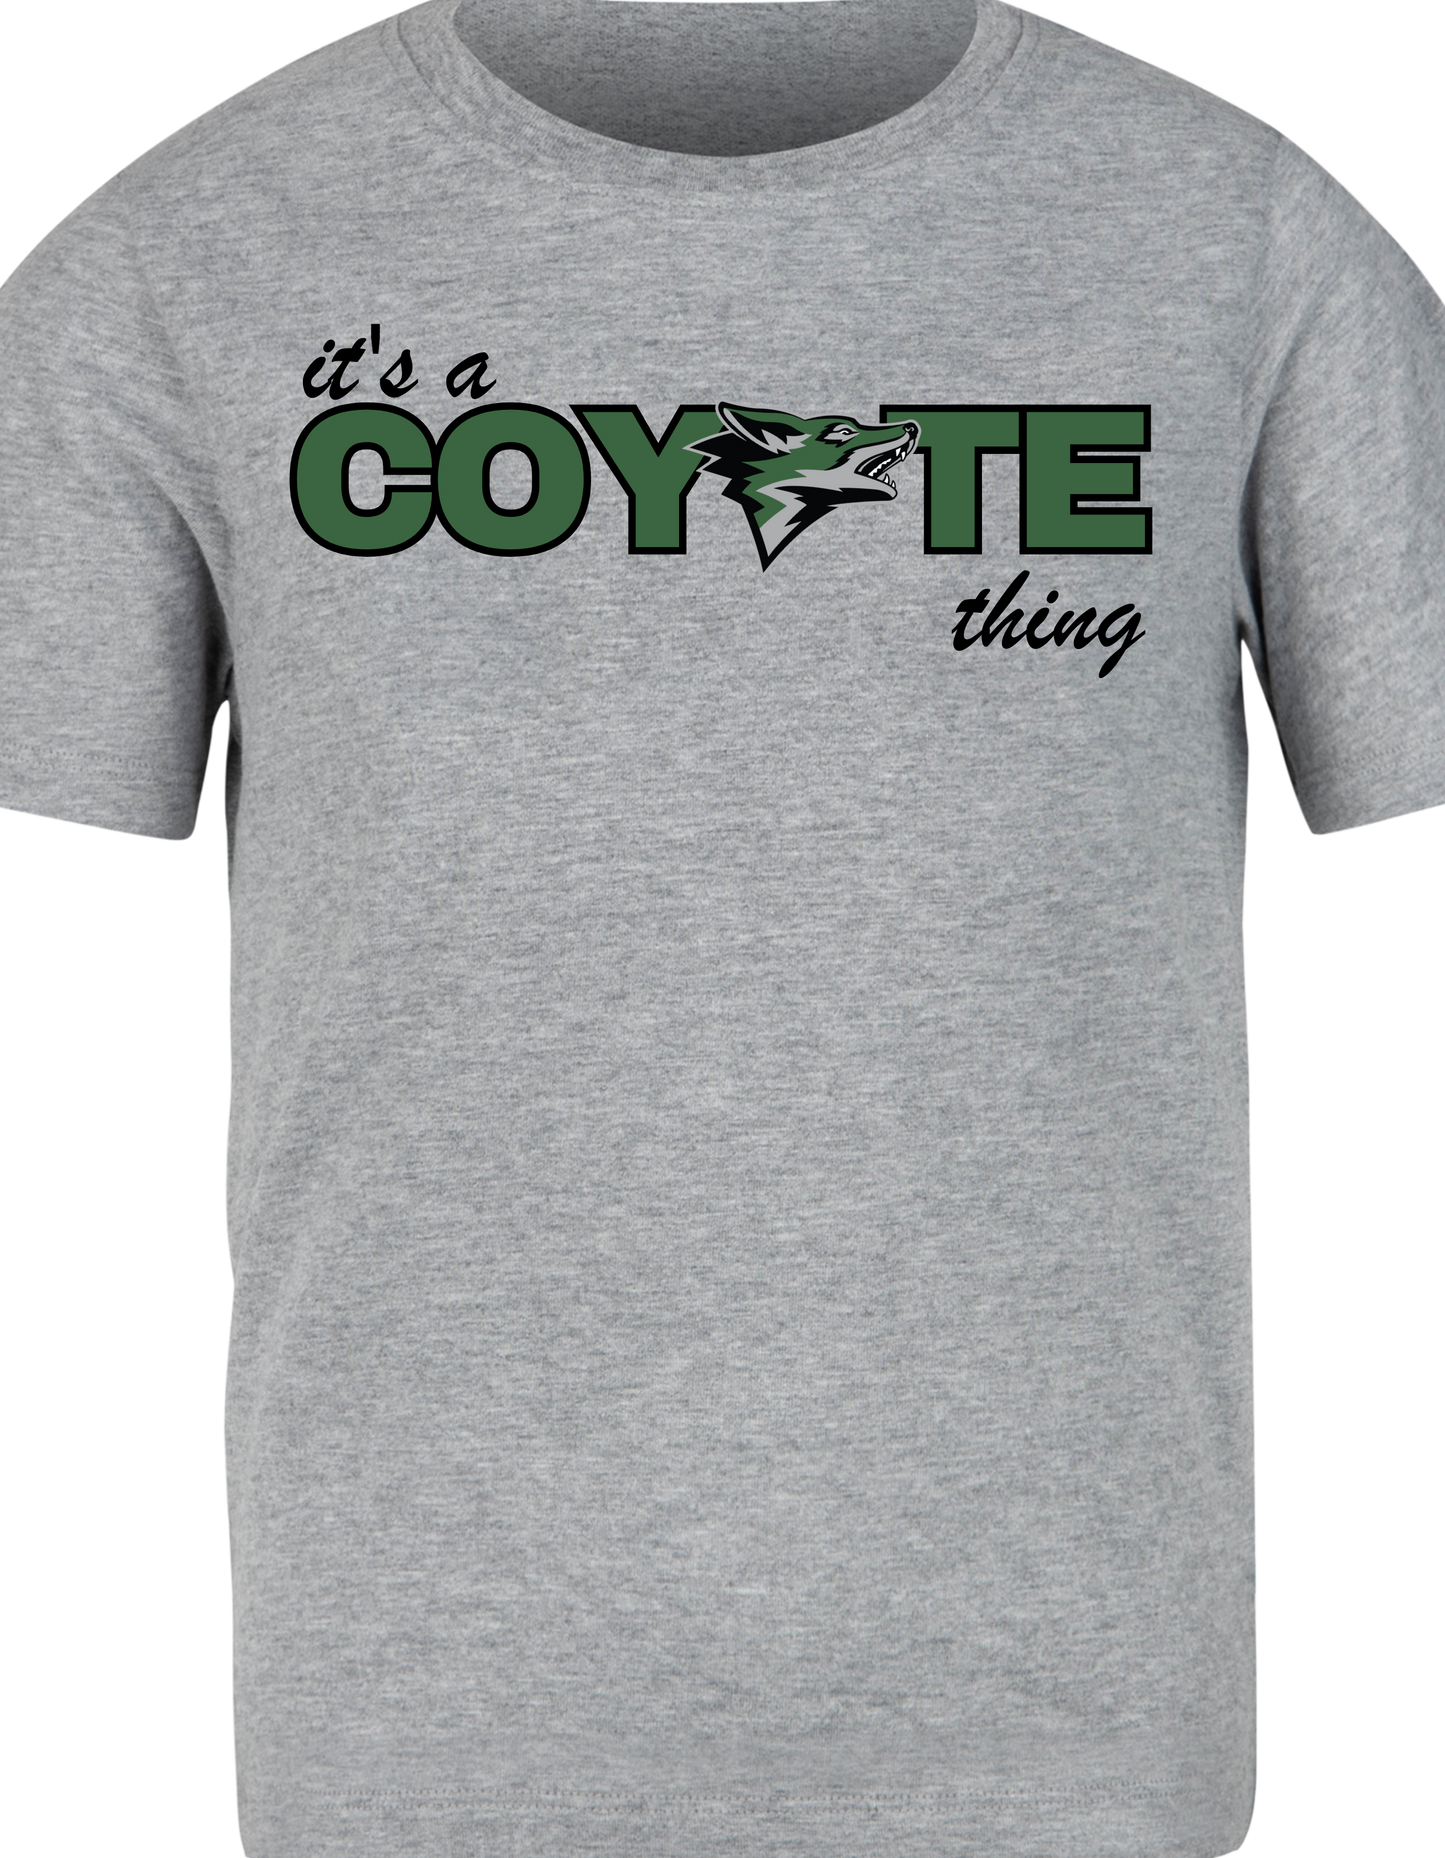 It's a Coyote thing